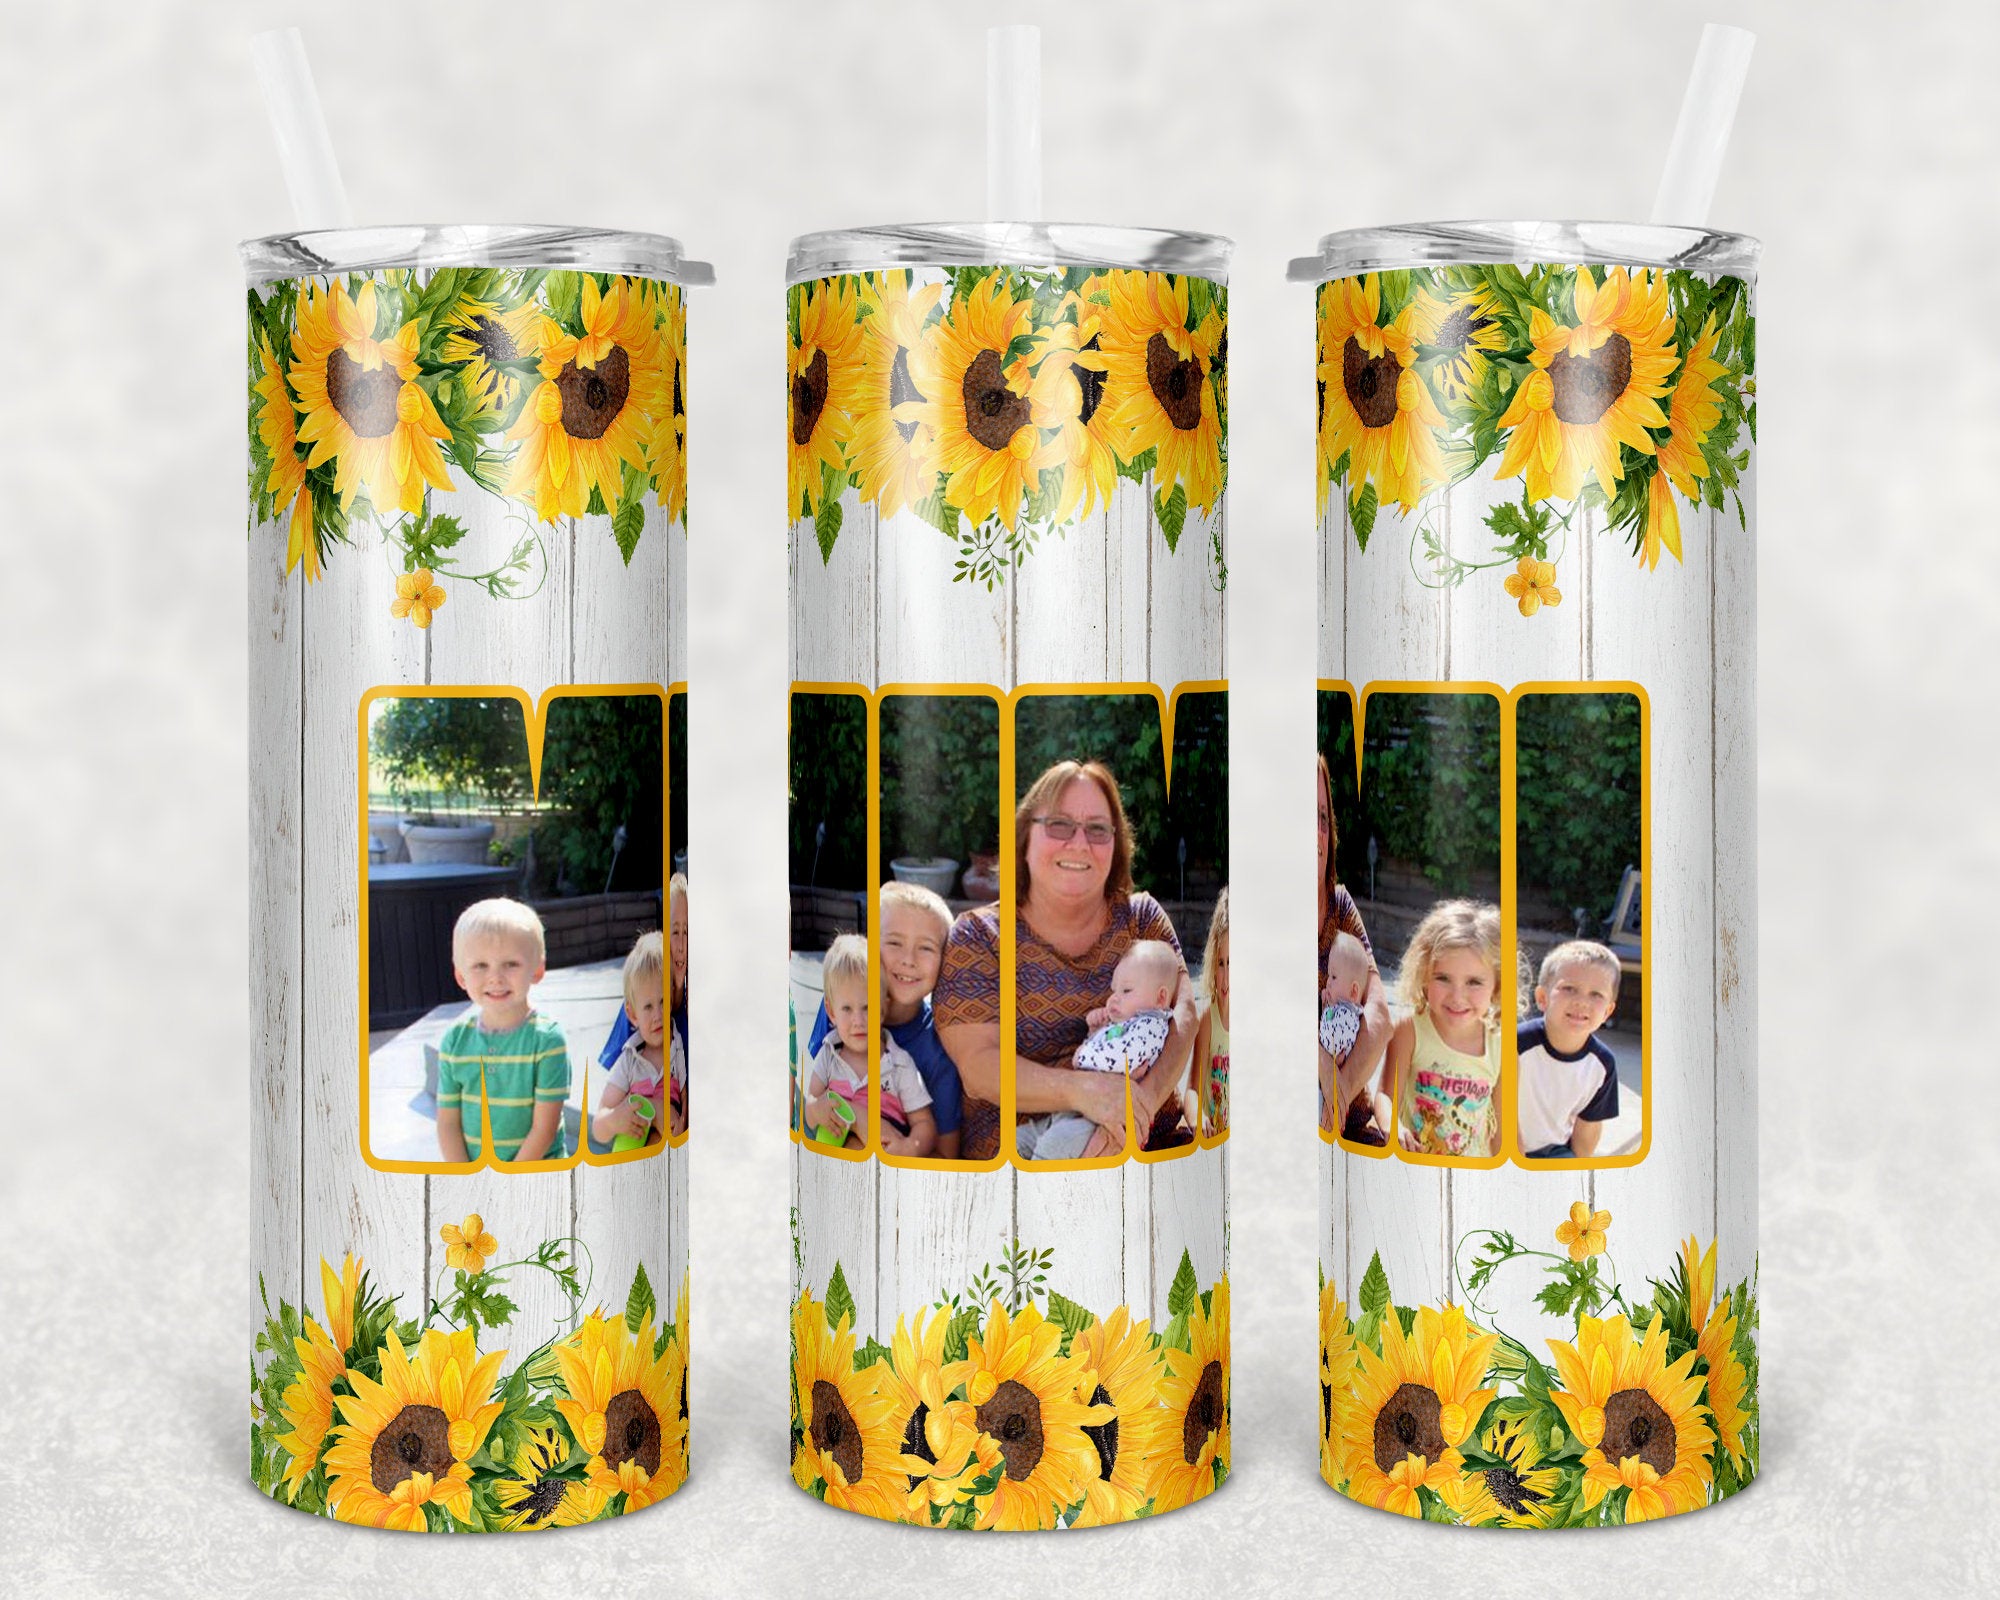 20 Oz Skinny Tumbler Picture Frame Rustic Wood Sunflower Mimi Photo Space Personalized Design Mothers Day